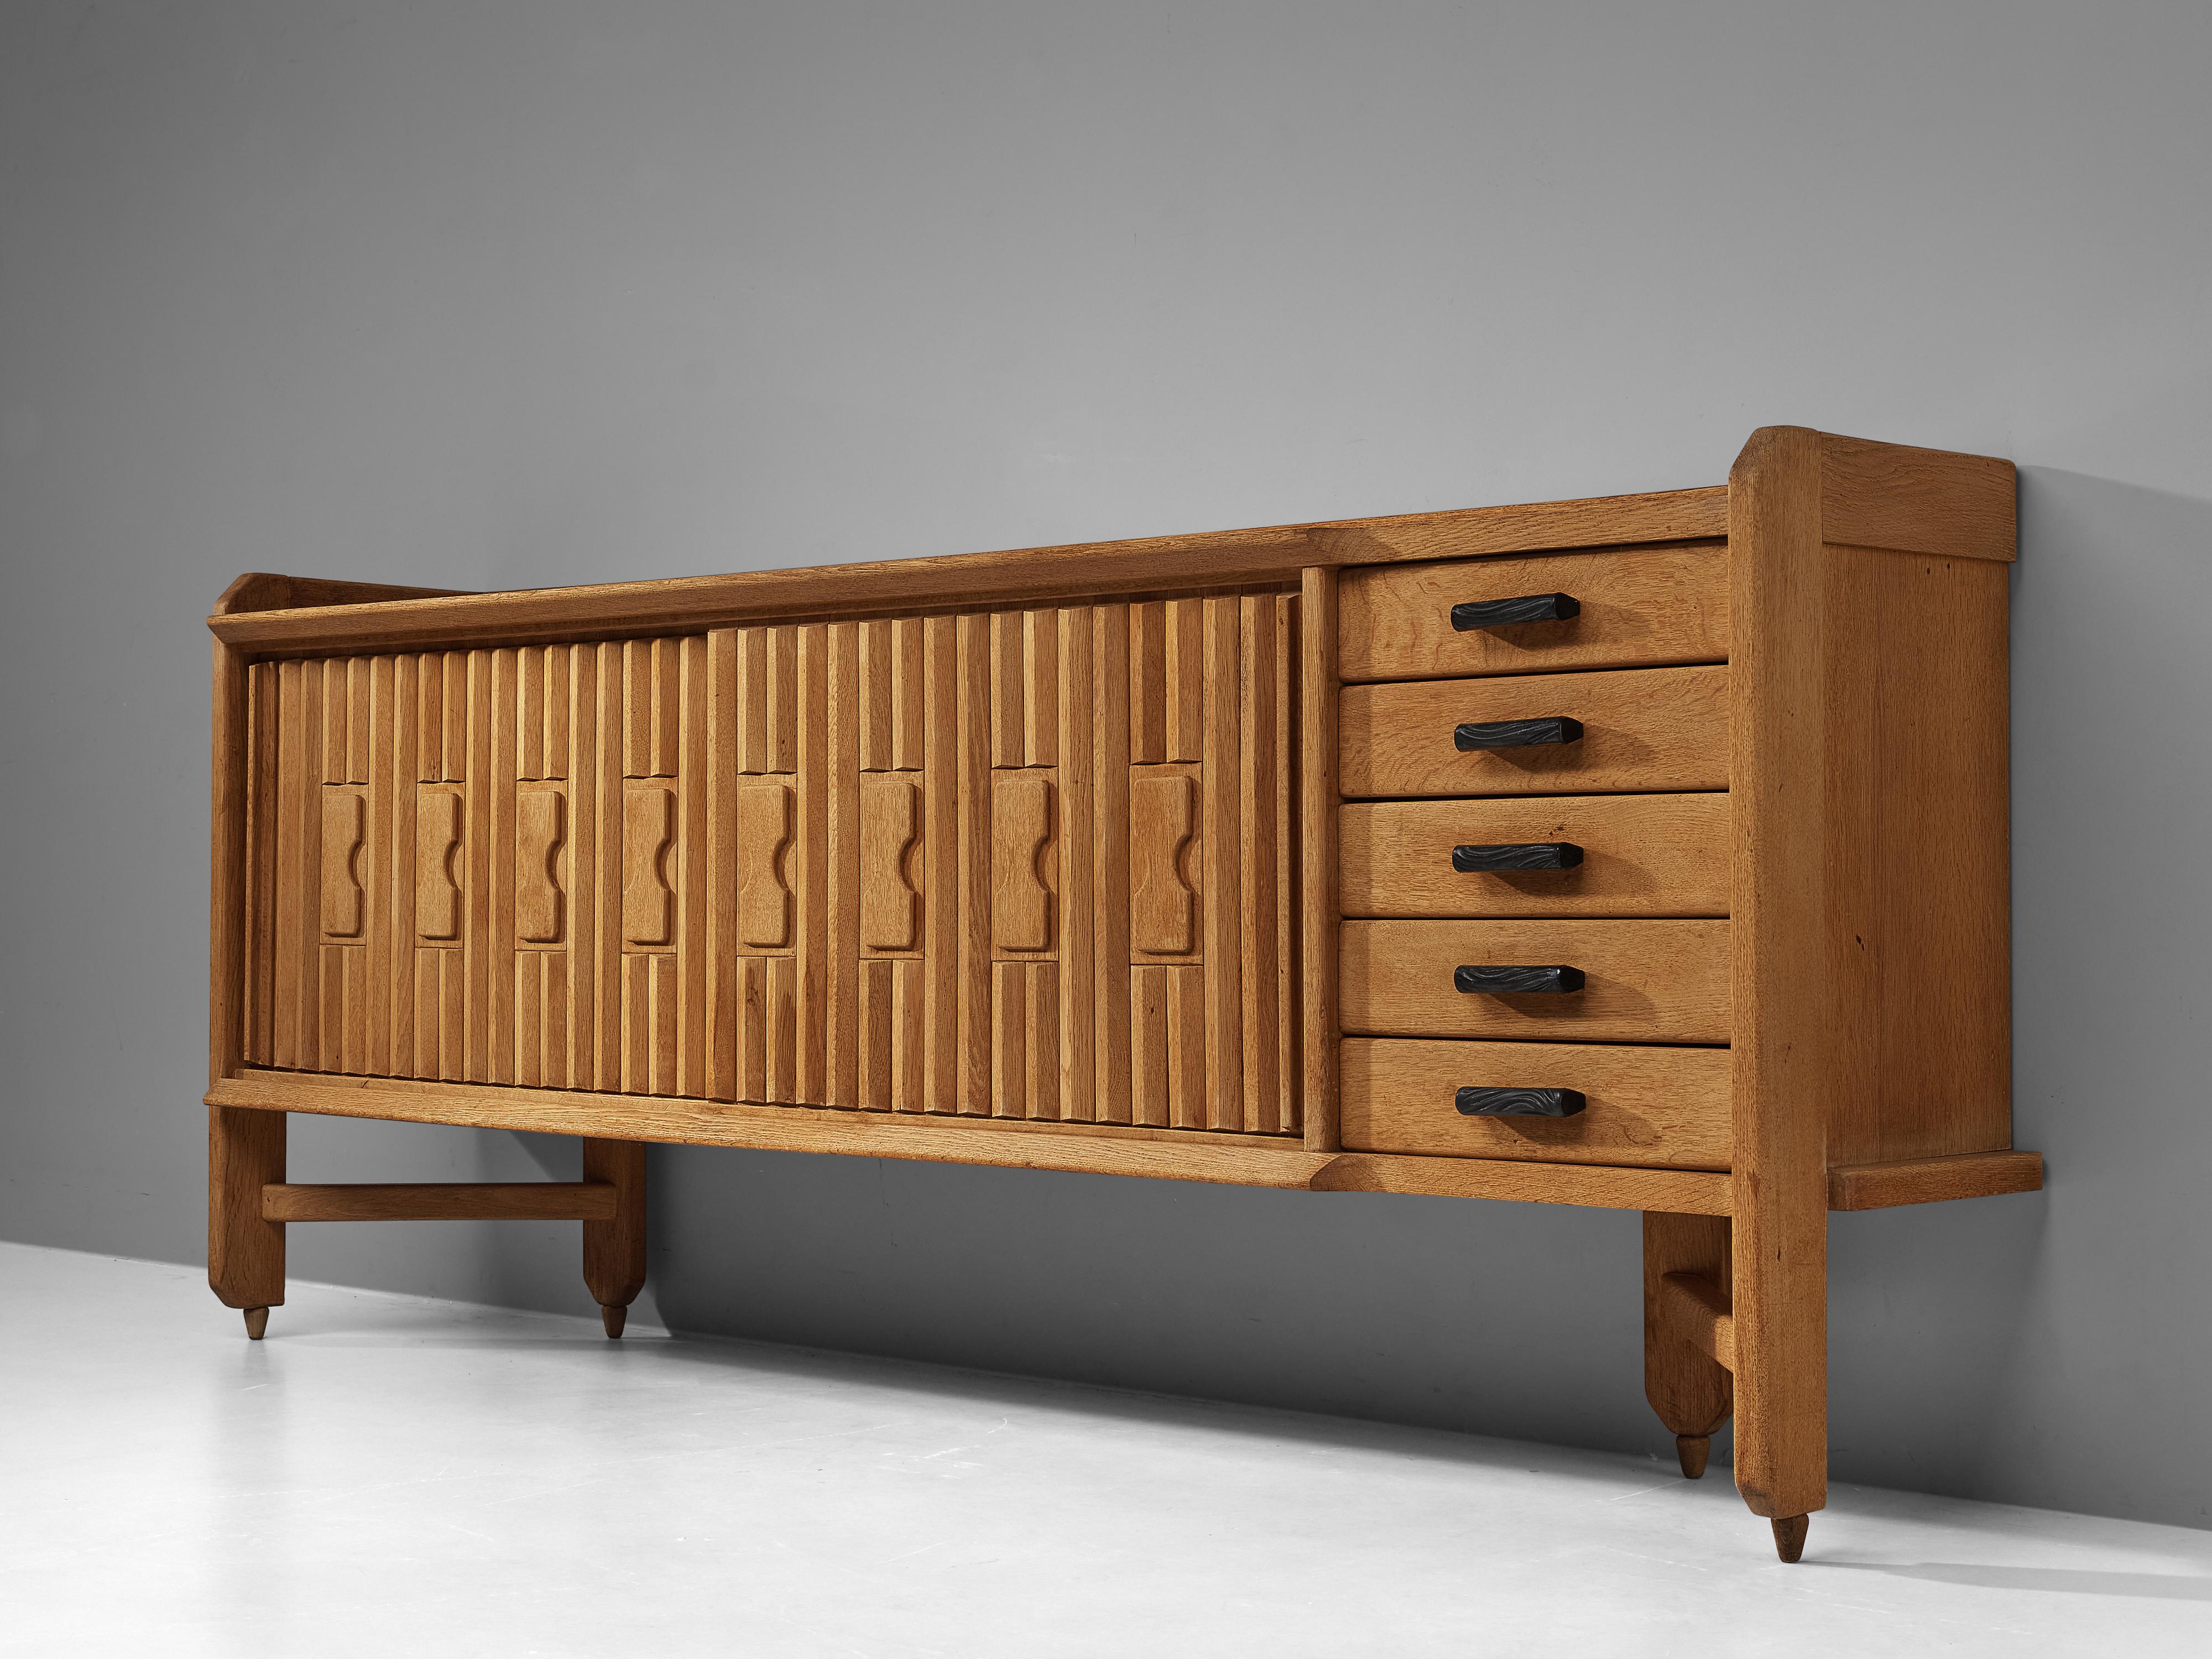 Guillerme et Chambron, sideboard, oak, ceramic, France, 1960s 

Characteristic sideboard in solid oak with ceramic tiles. This cabinet holds the characteristics of the French designer duo Guillerme et Chambron. The base has typical legs and